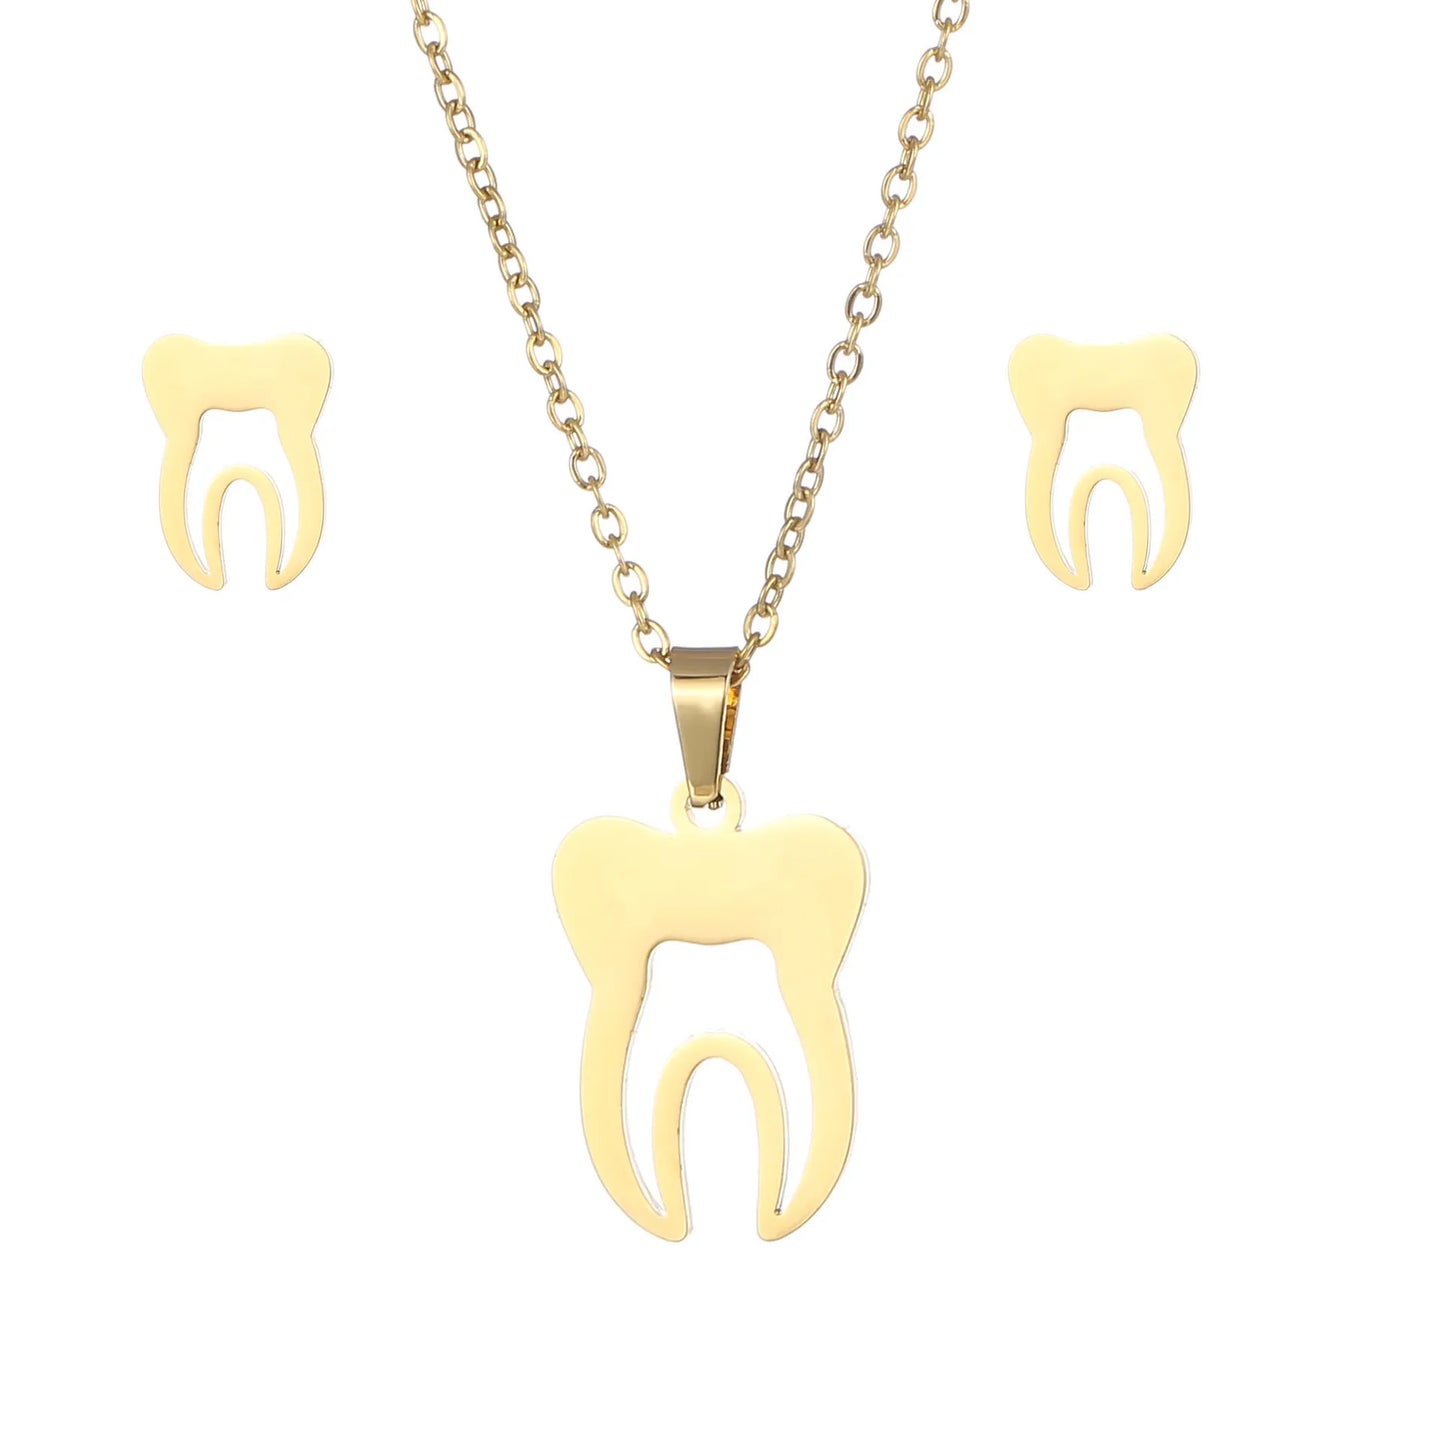 Fashion Dental Tooth Pendant Necklace Earring Jewelry Sets Stainless Steel Set for Women Dentist Medical Gift for Doctor/Nurse